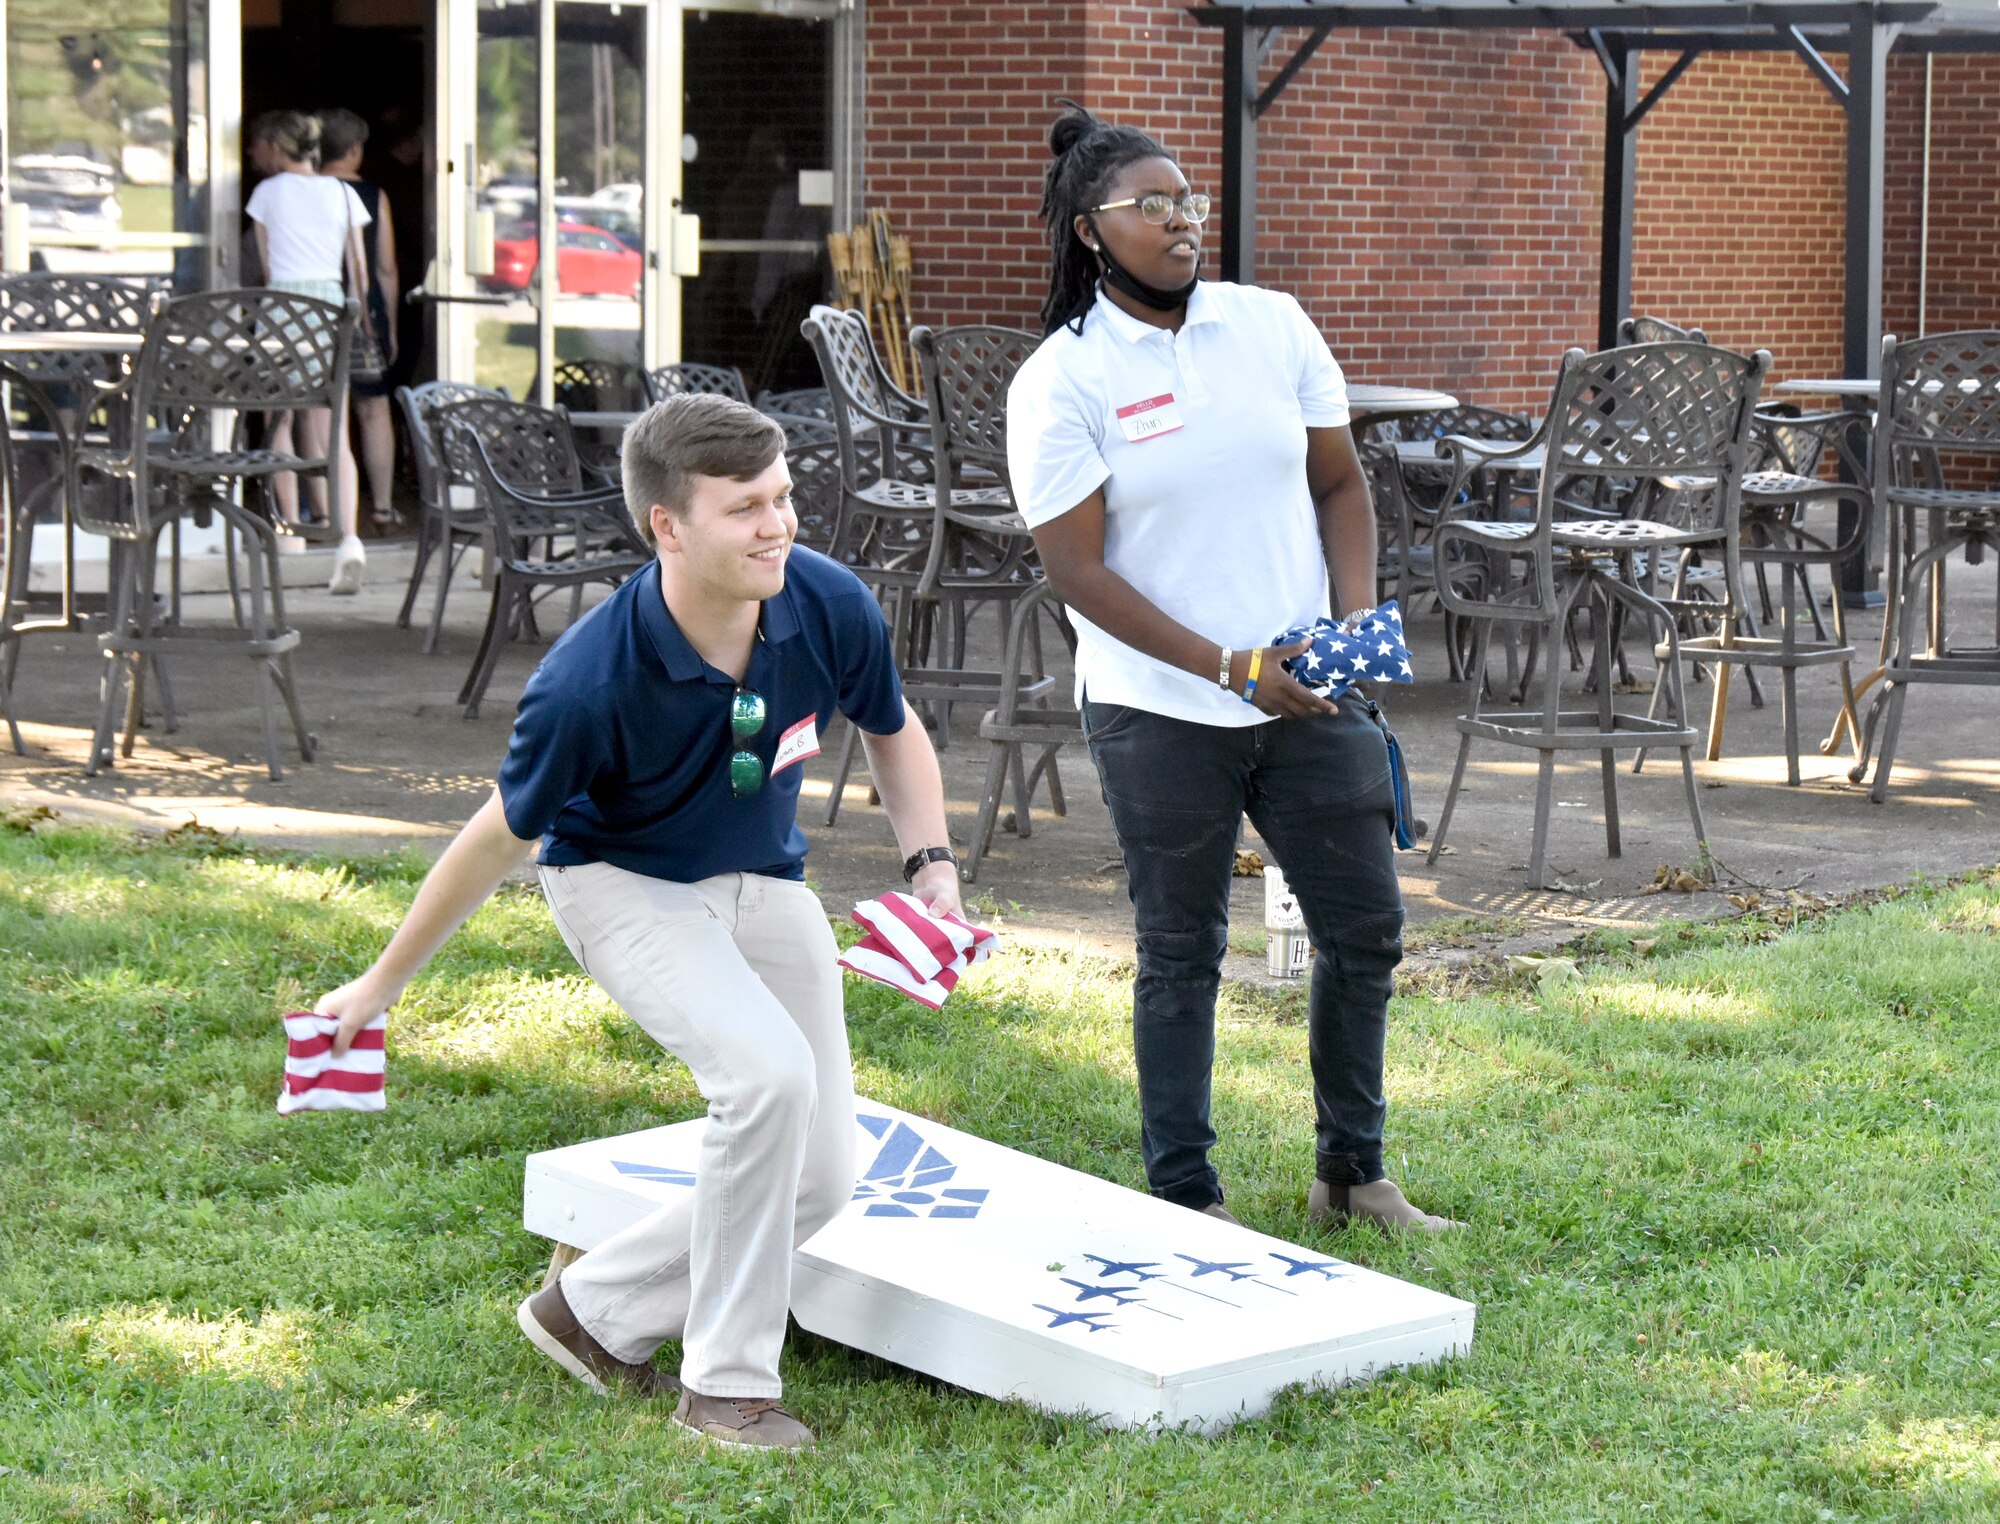 James Bailey and Zhuri Winfree-Givens, summer interns at Arnold Air Force Base, Tenn., play corn hole during a social event June 17, 2021, at the Arnold Lakeside Complex. Leadership with the Department of Defense and Arnold Engineering Development Complex Test Operations and Sustainment contractor, National Aerospace Solutions, LLC, were also in attendance to welcome and speak to the group. (U.S. Air Force photo by Bradley Hicks)